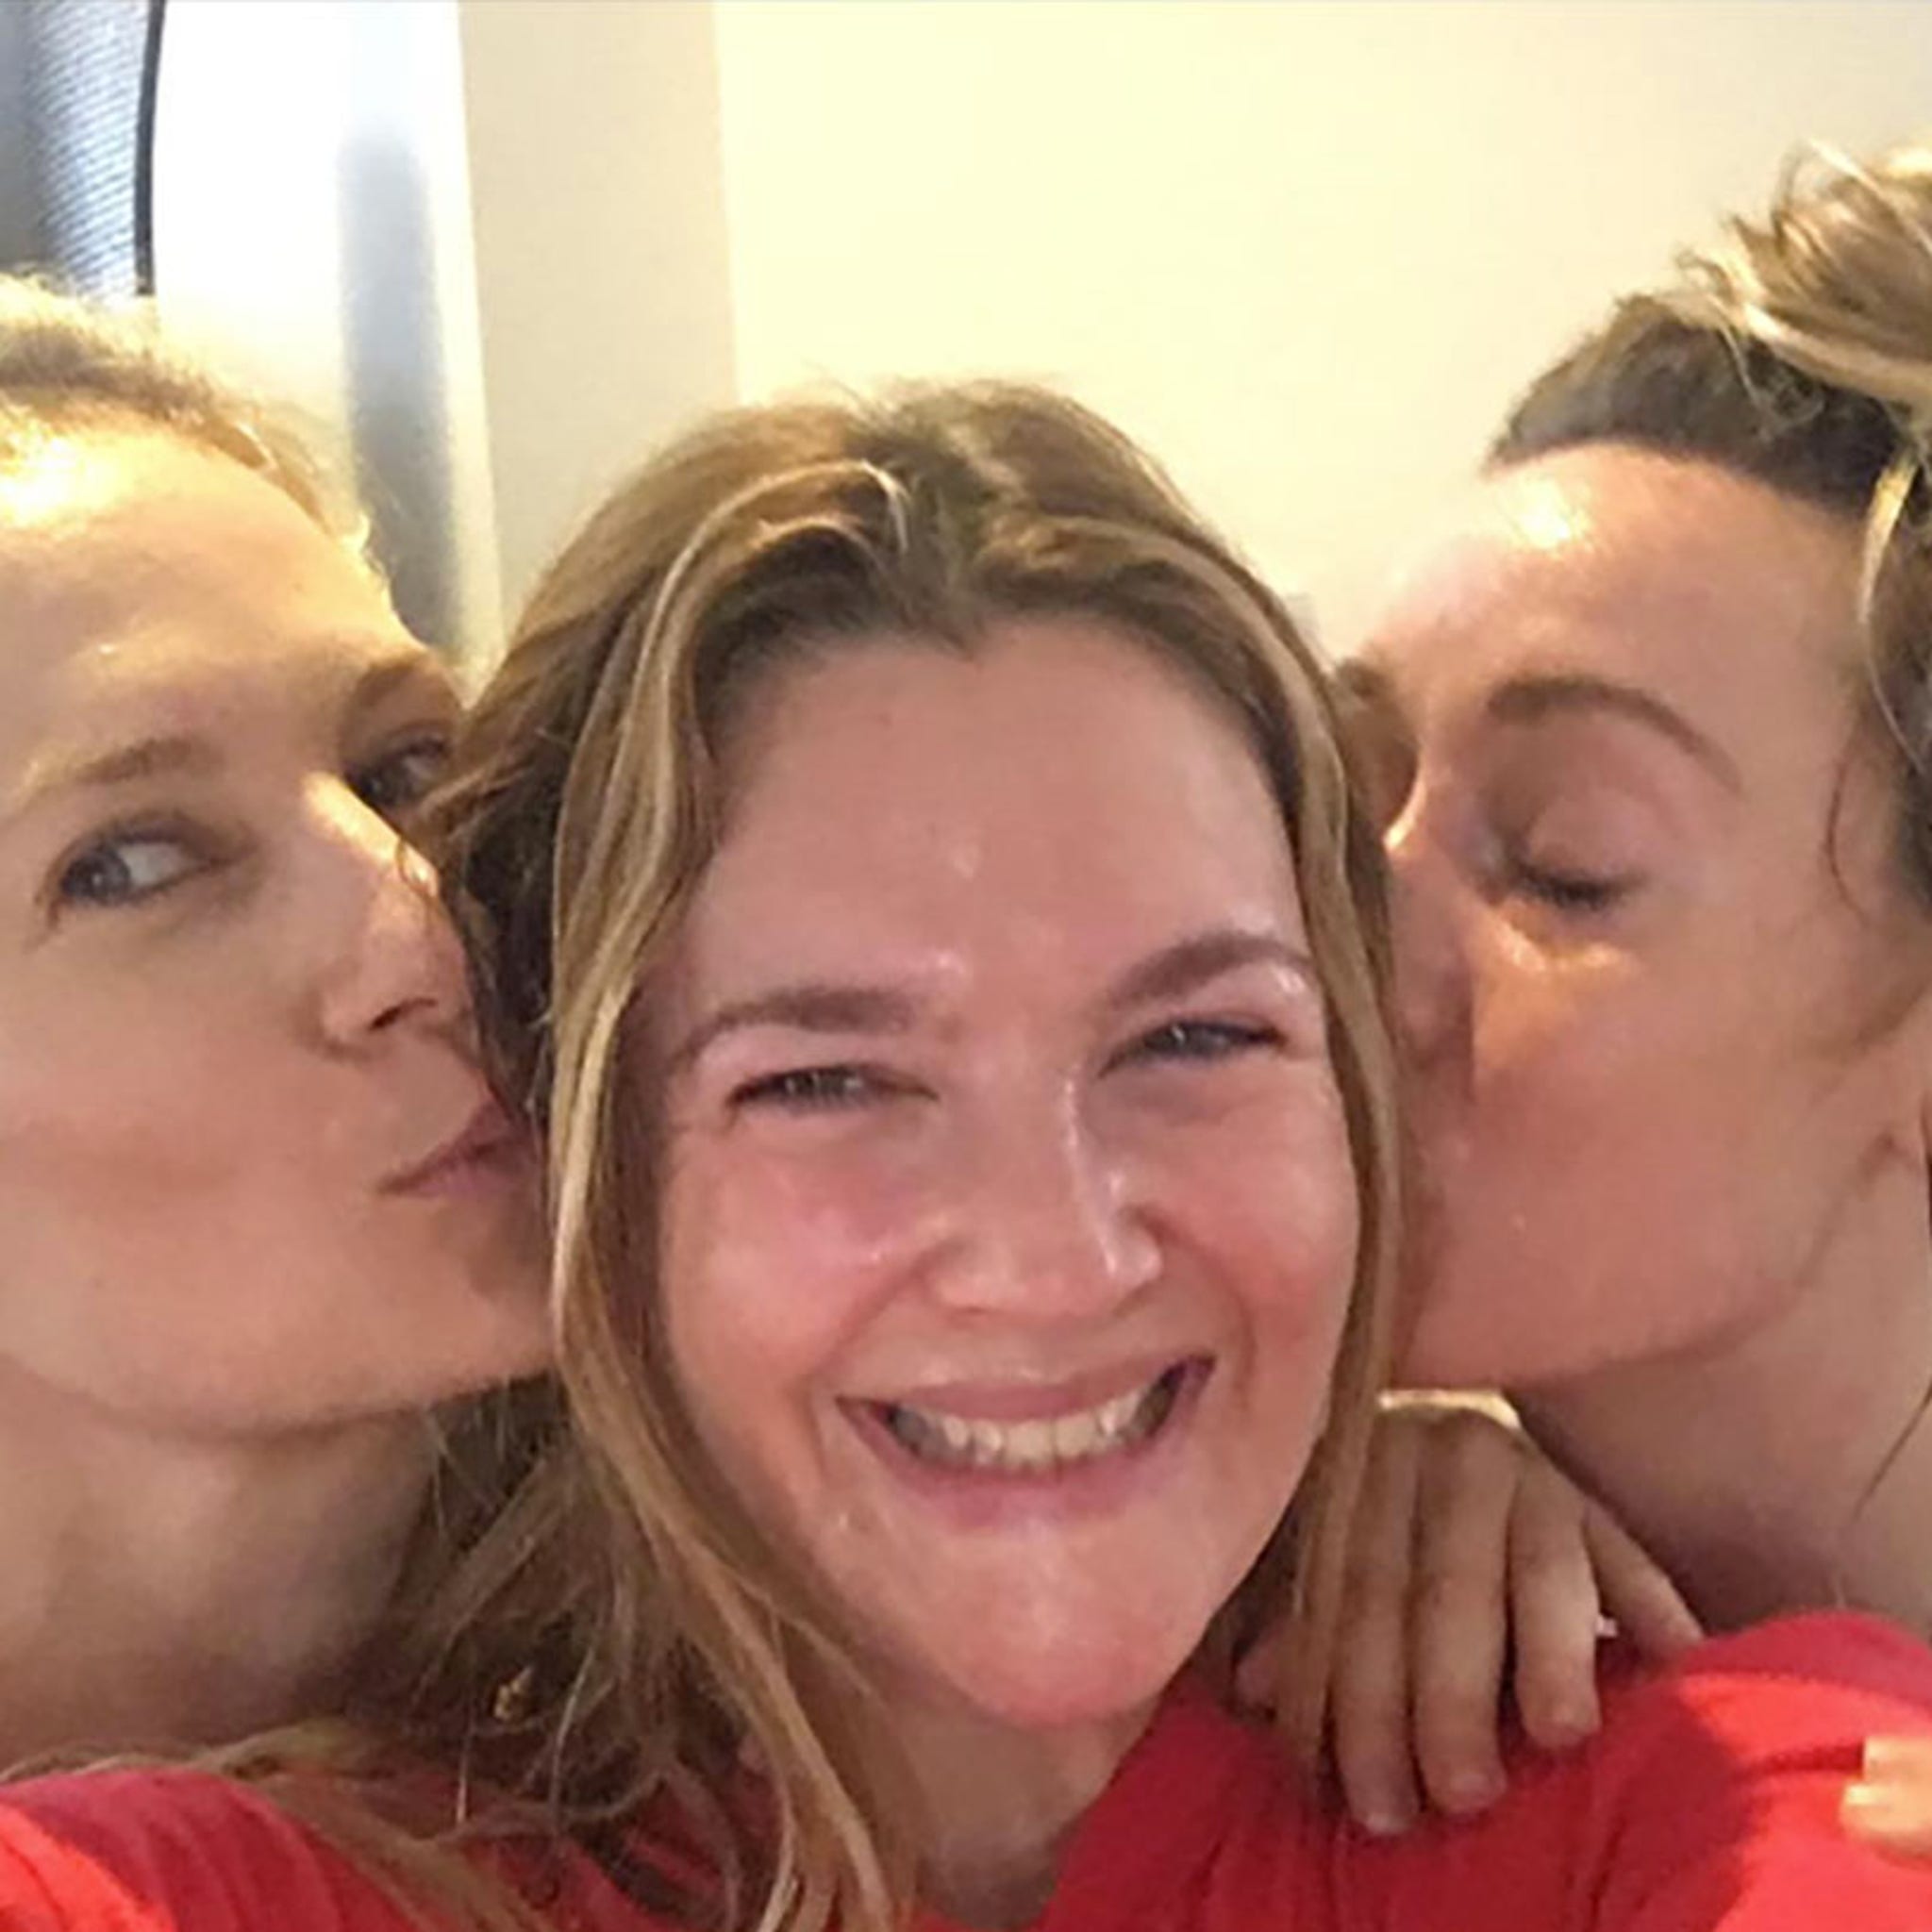 Drew Barrymore on Instagram: THE HEART DUTCH OVEN of your dreams